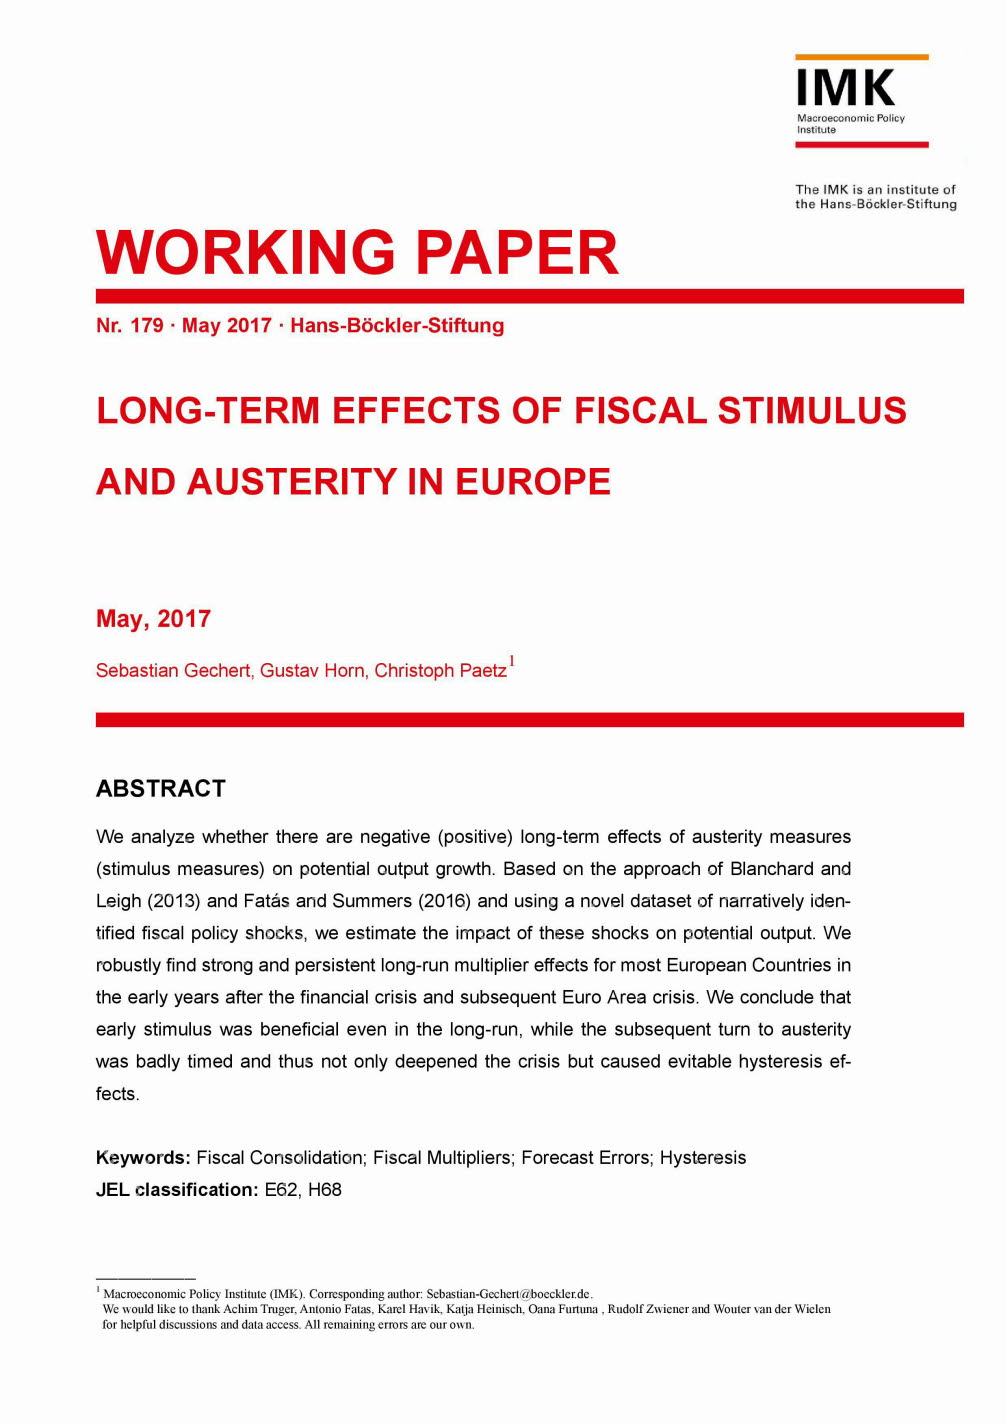 Long-term effects of fiscal stimulus and austerity in Europe